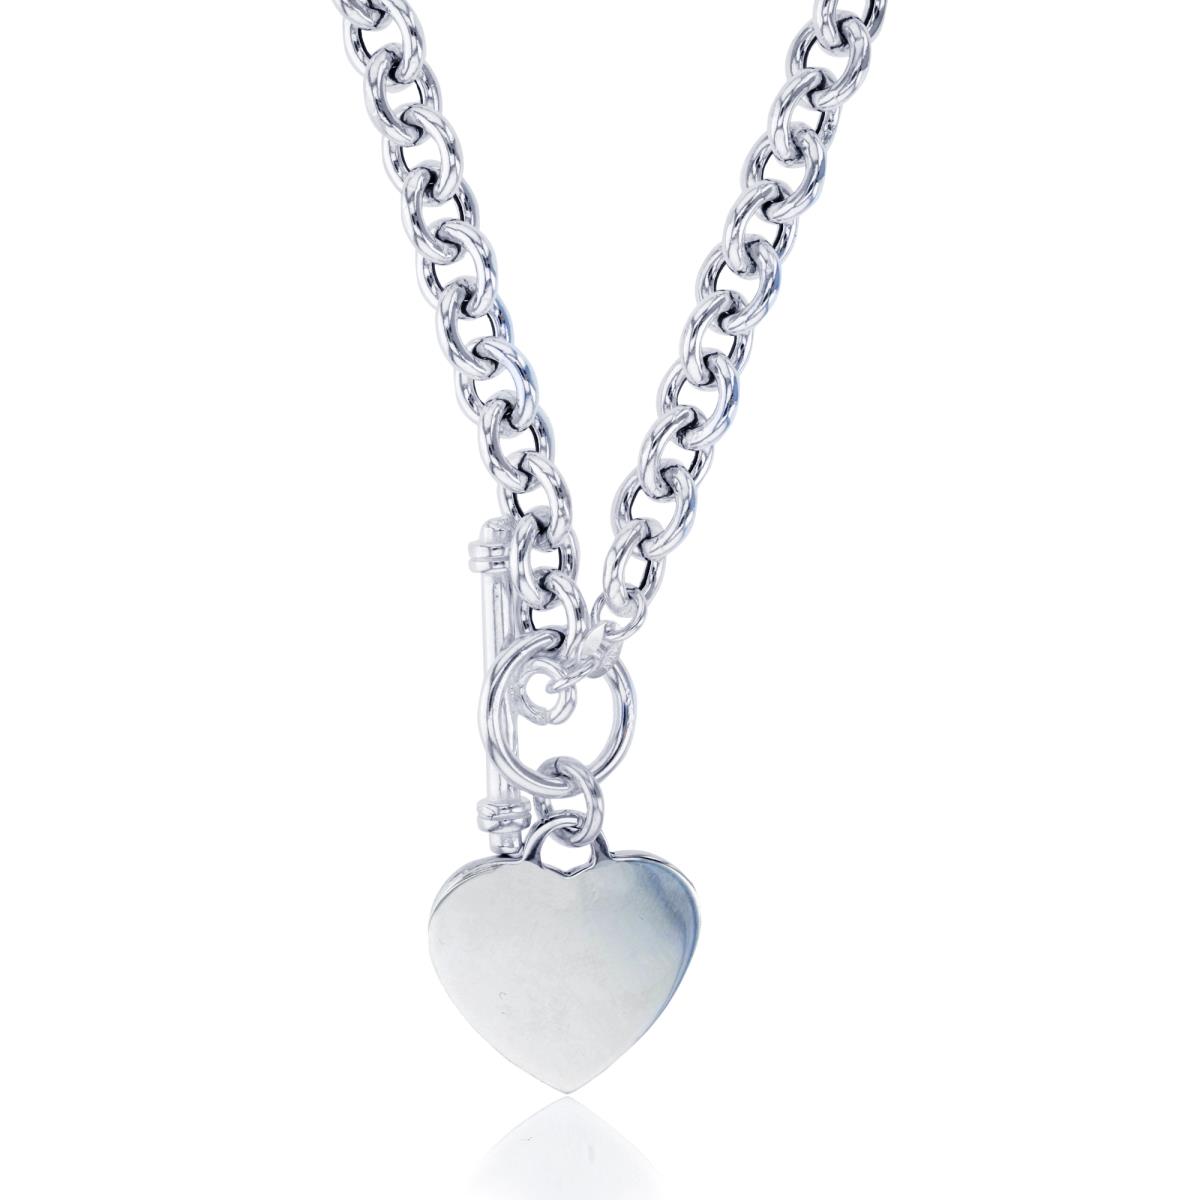 Sterling Silver Silver Plated Rolo Dangling Heart Plate 17" Necklace with Toggle